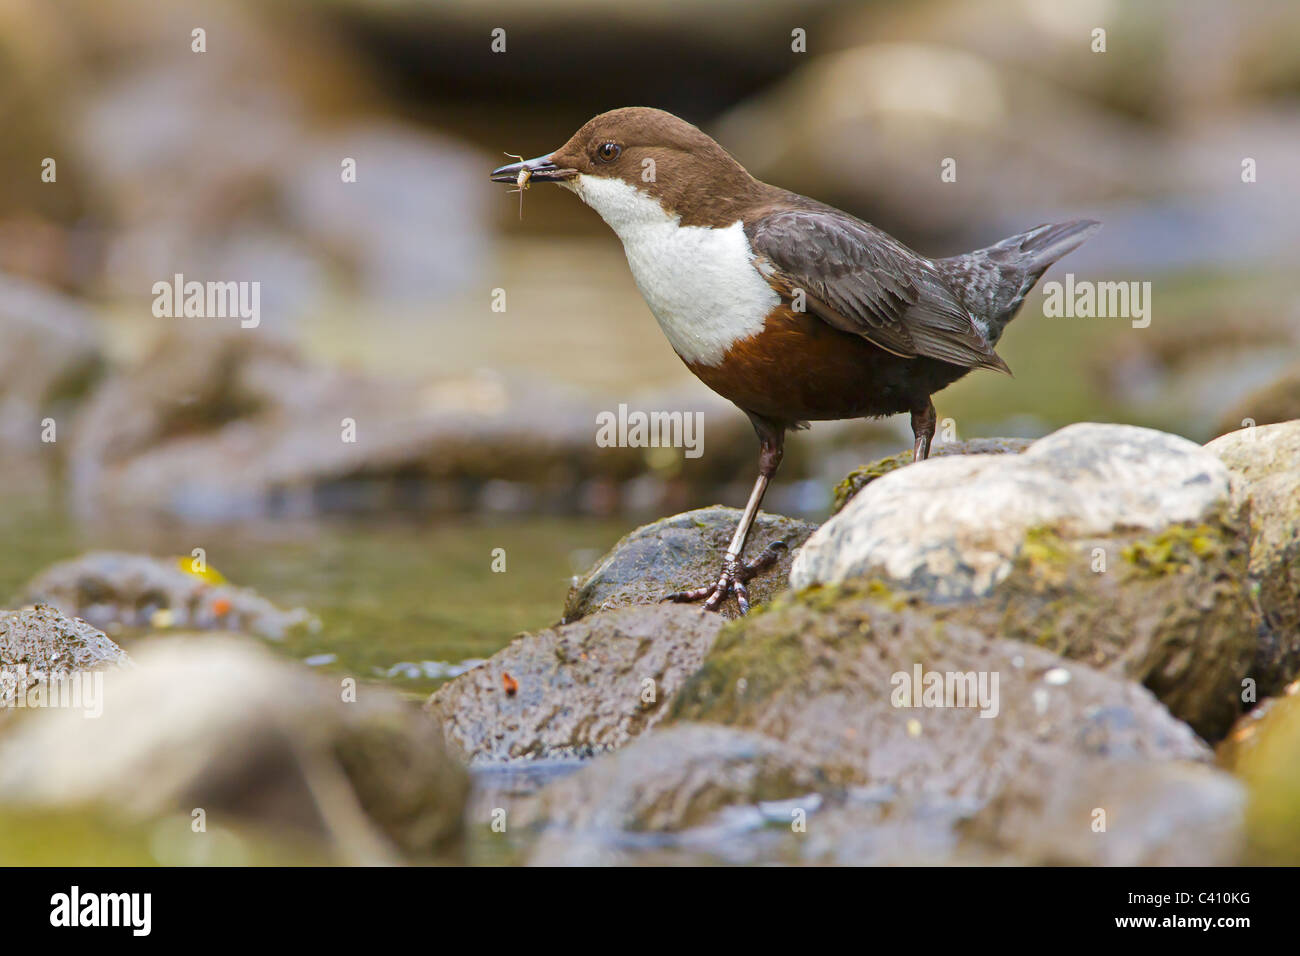 Dipper feeding in a small river. Stock Photo